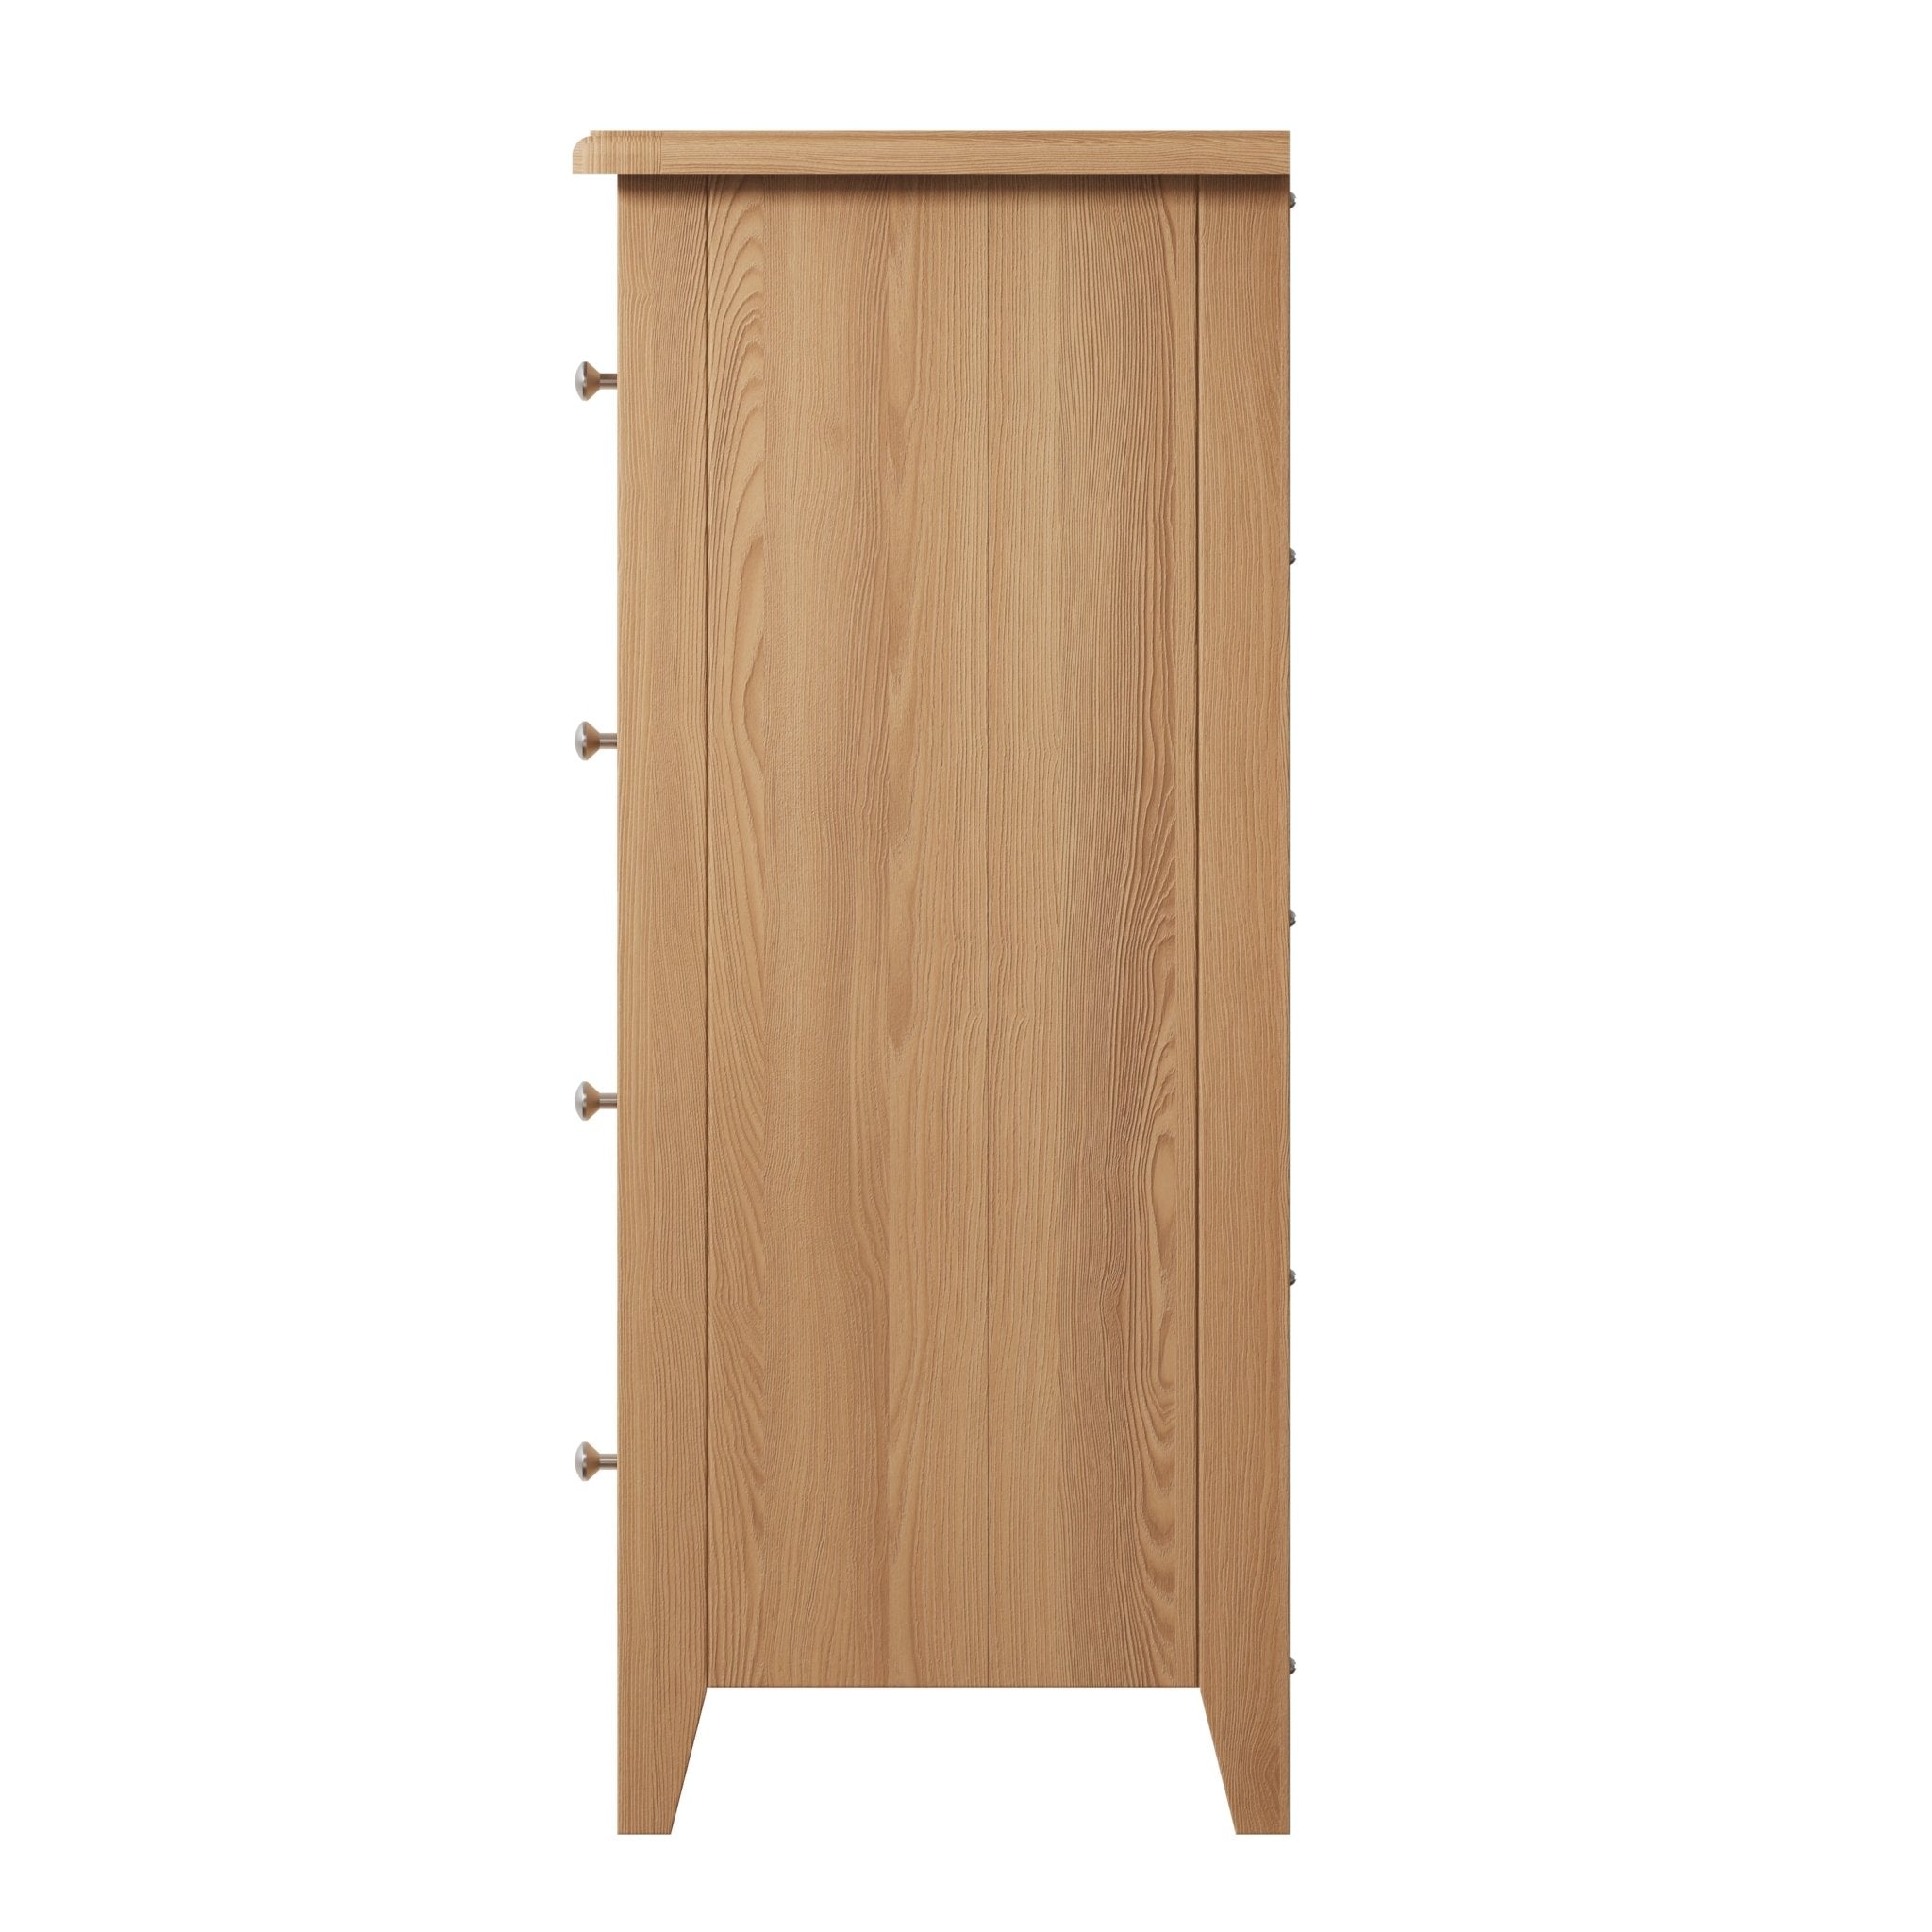 Ockley Oak 2 Over 3 Chest of Drawers - Duck Barn Interiors